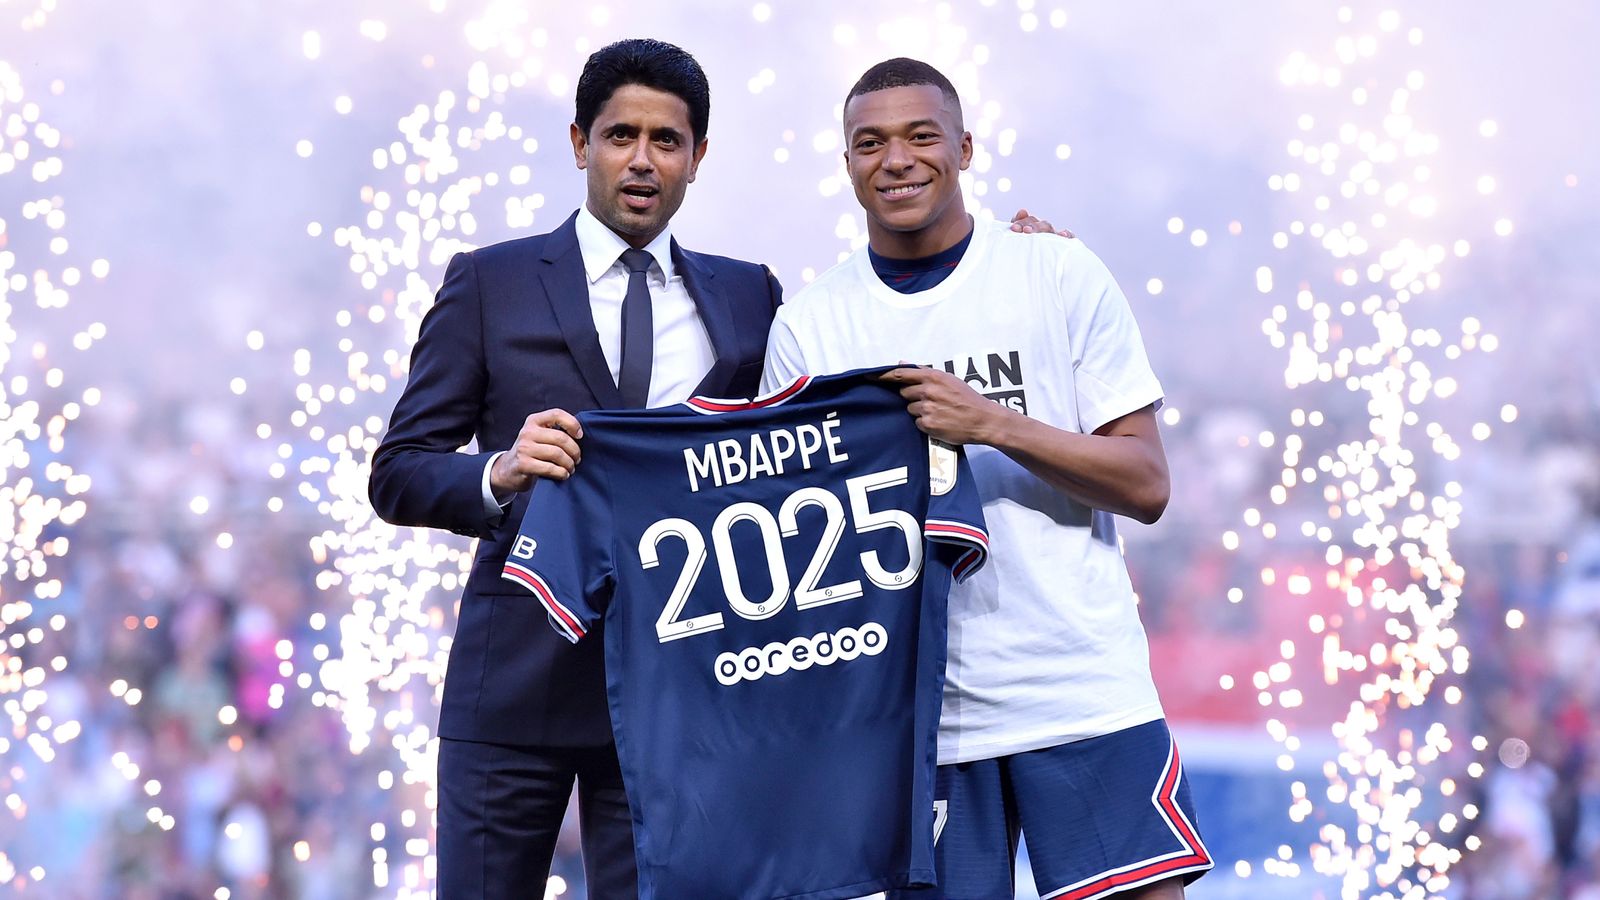 Kylian Mbappe: PSG forward signs new contract with Ligue 1 champions but La Liga is set to file complaint